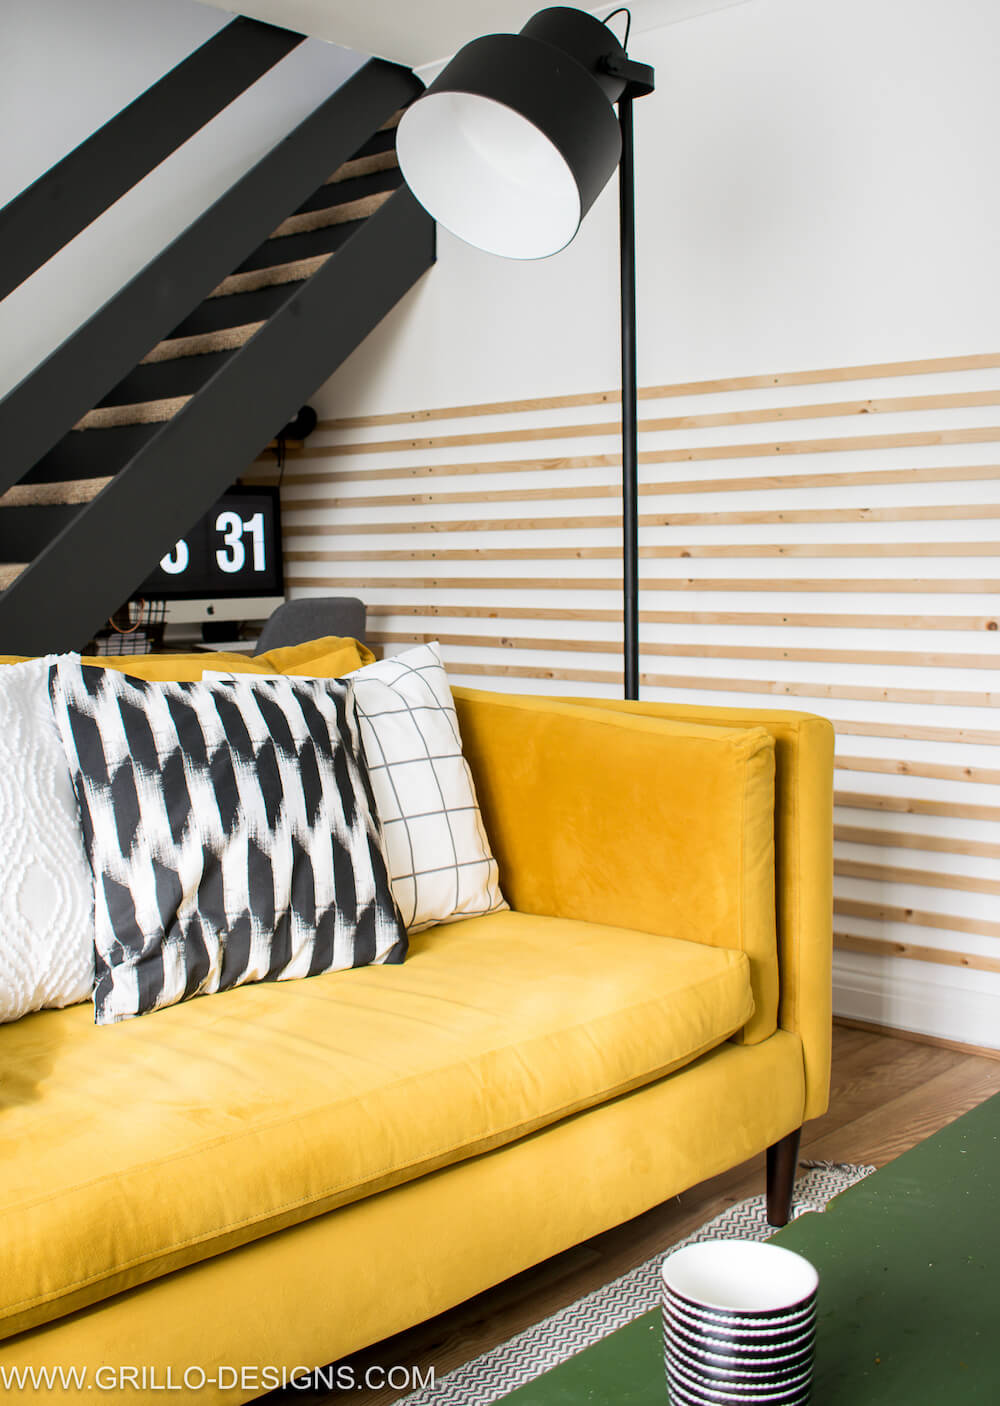 Large franke floor lamp positioned at the side of the yellow sofa